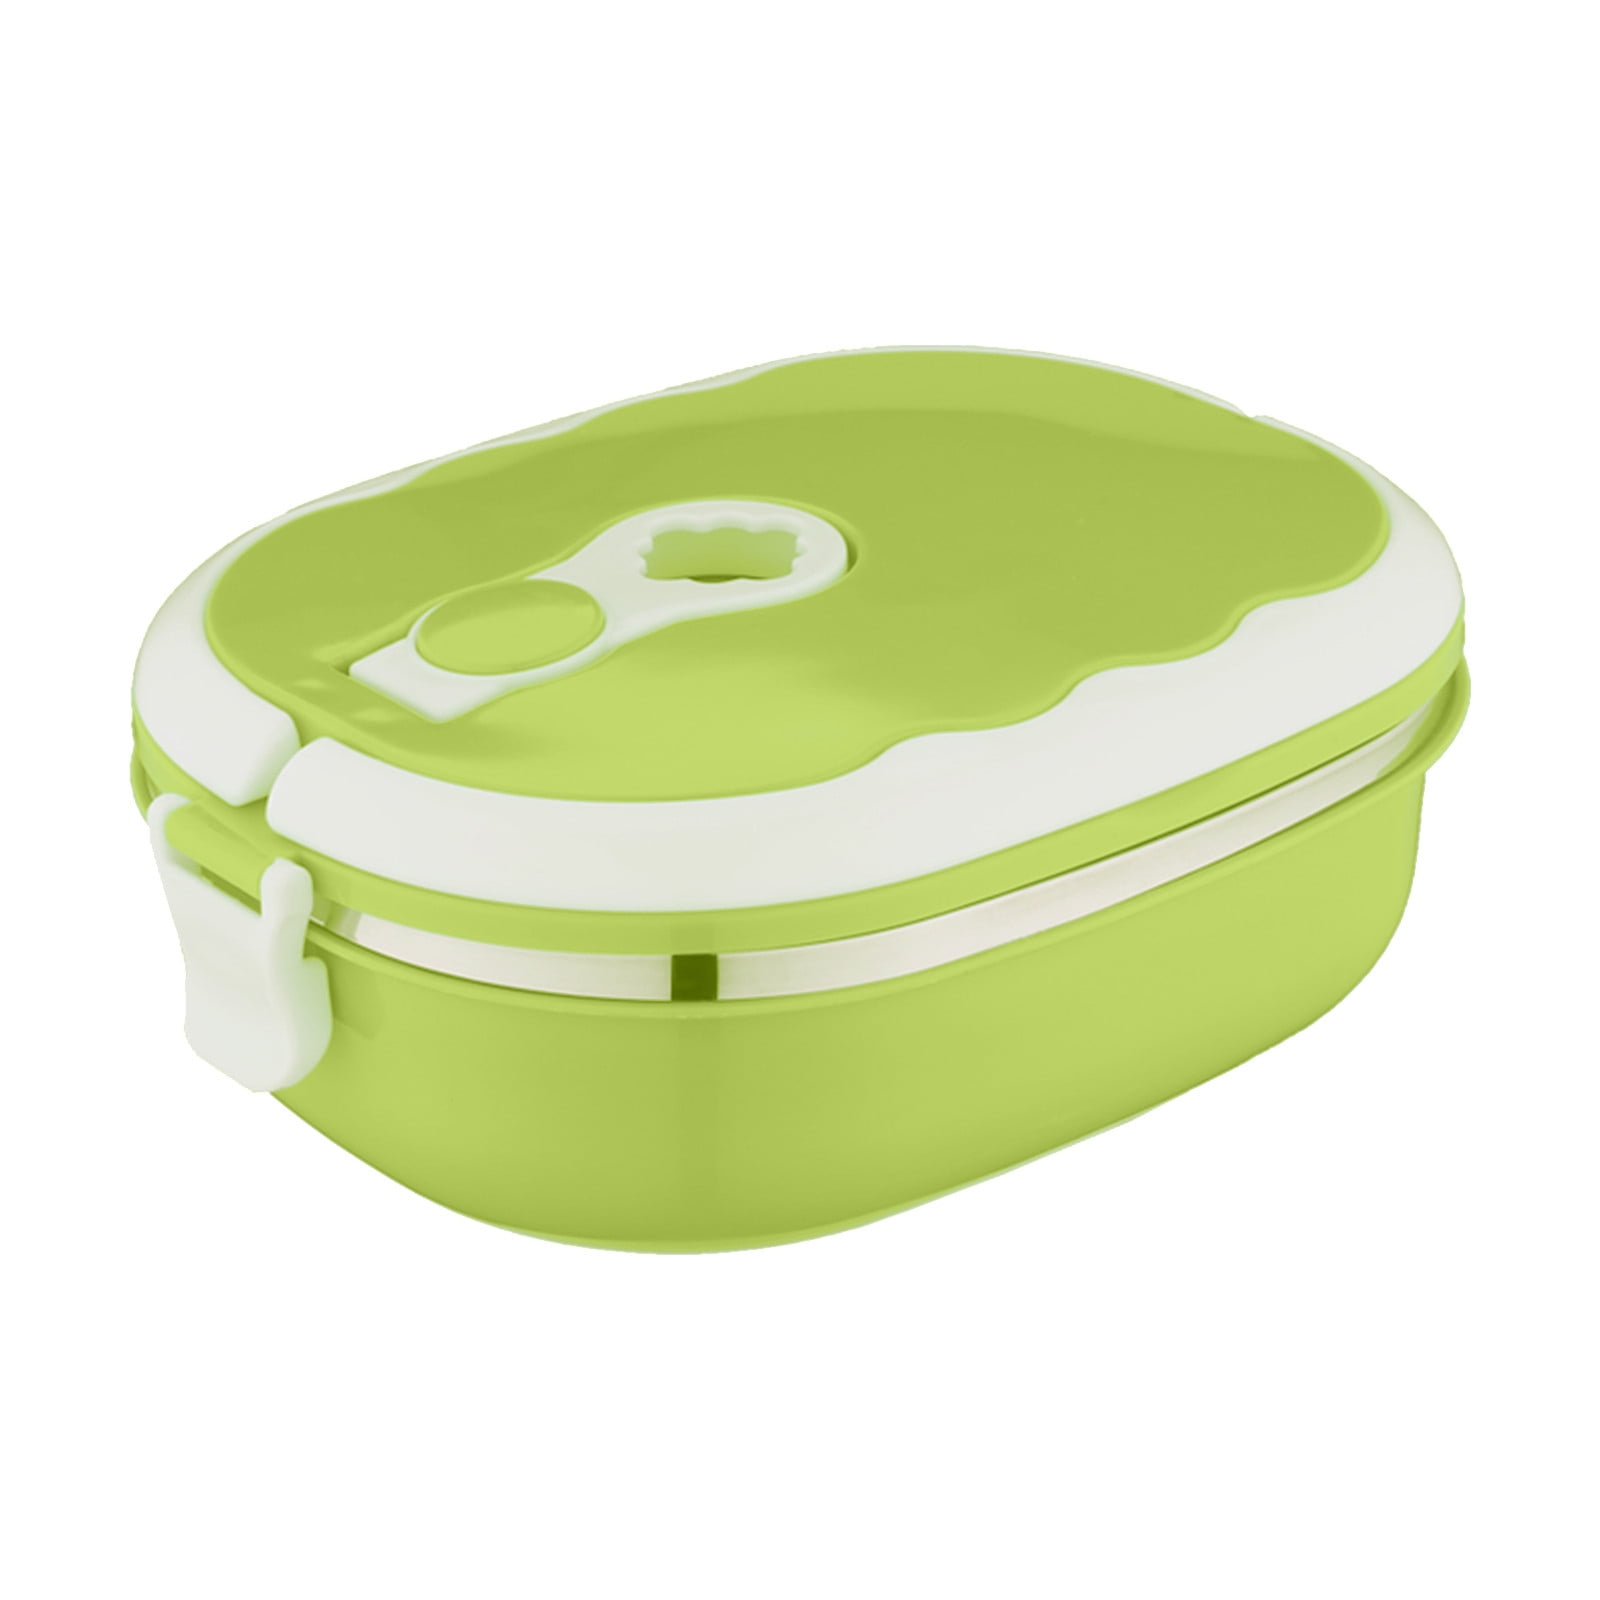 Insulated Lunch Containers that will Stay Hot All Day! ZoLi THIS+THAT